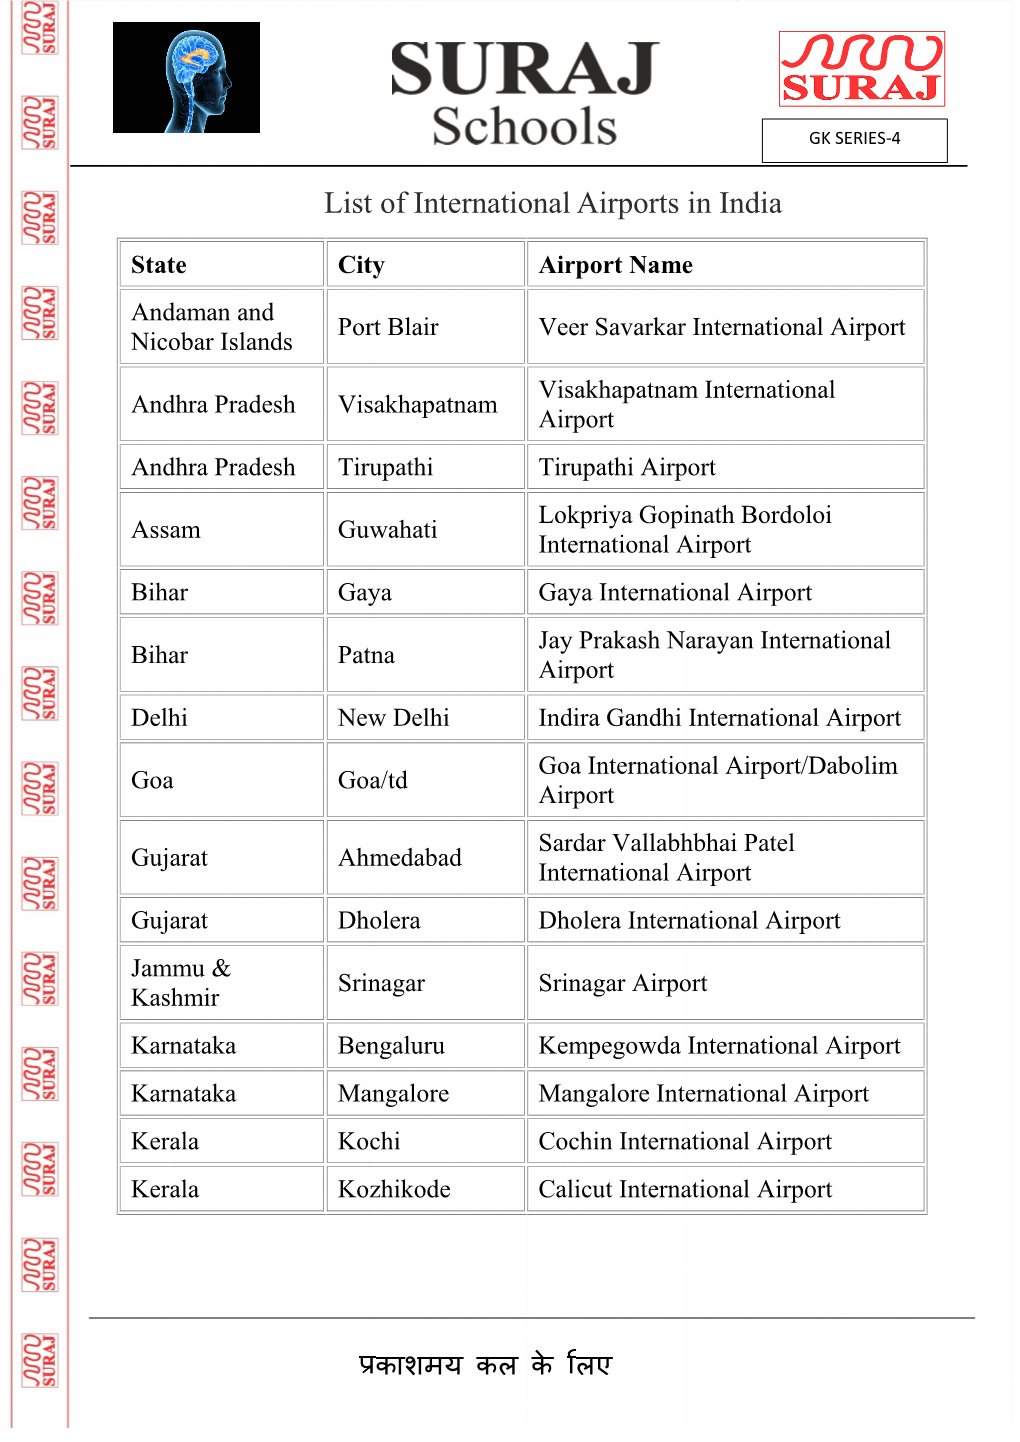 List of Internatio List of International Airports in India Irports in India